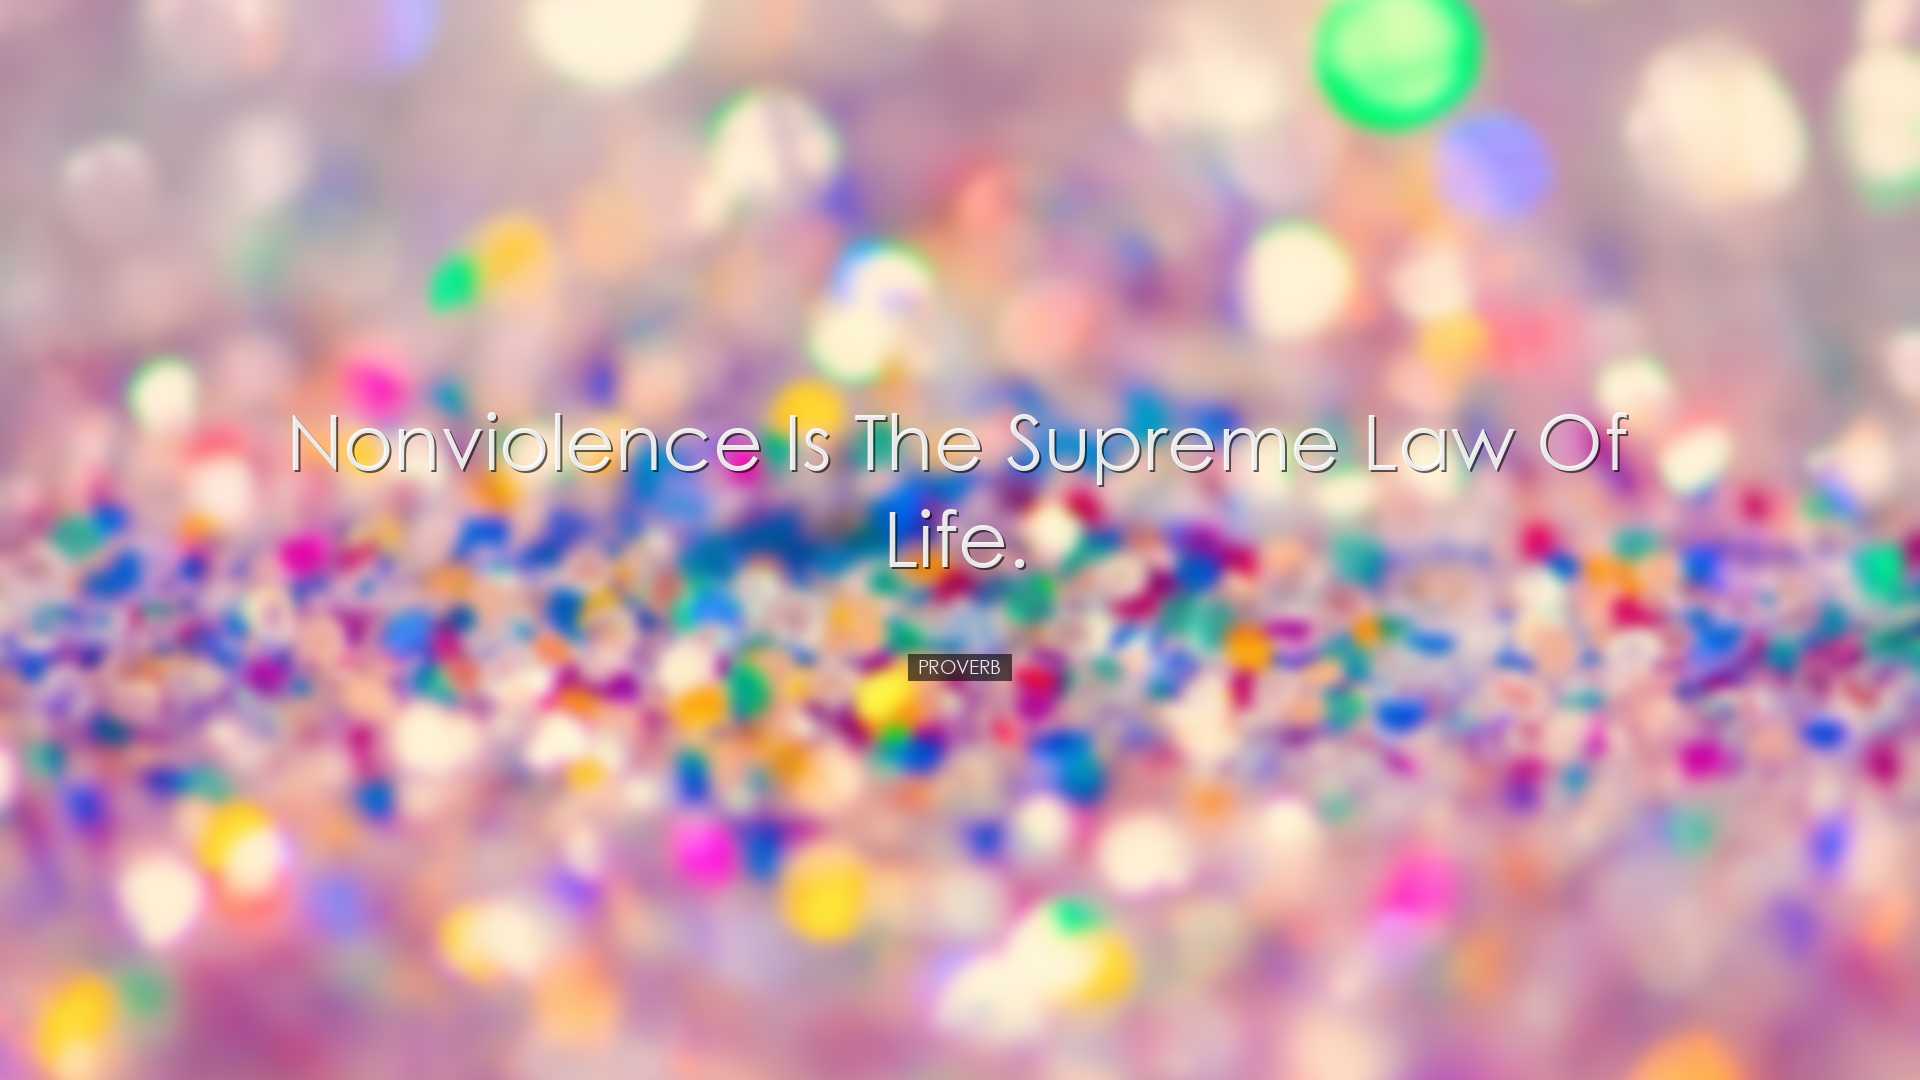 Nonviolence is the supreme law of life. - Proverb